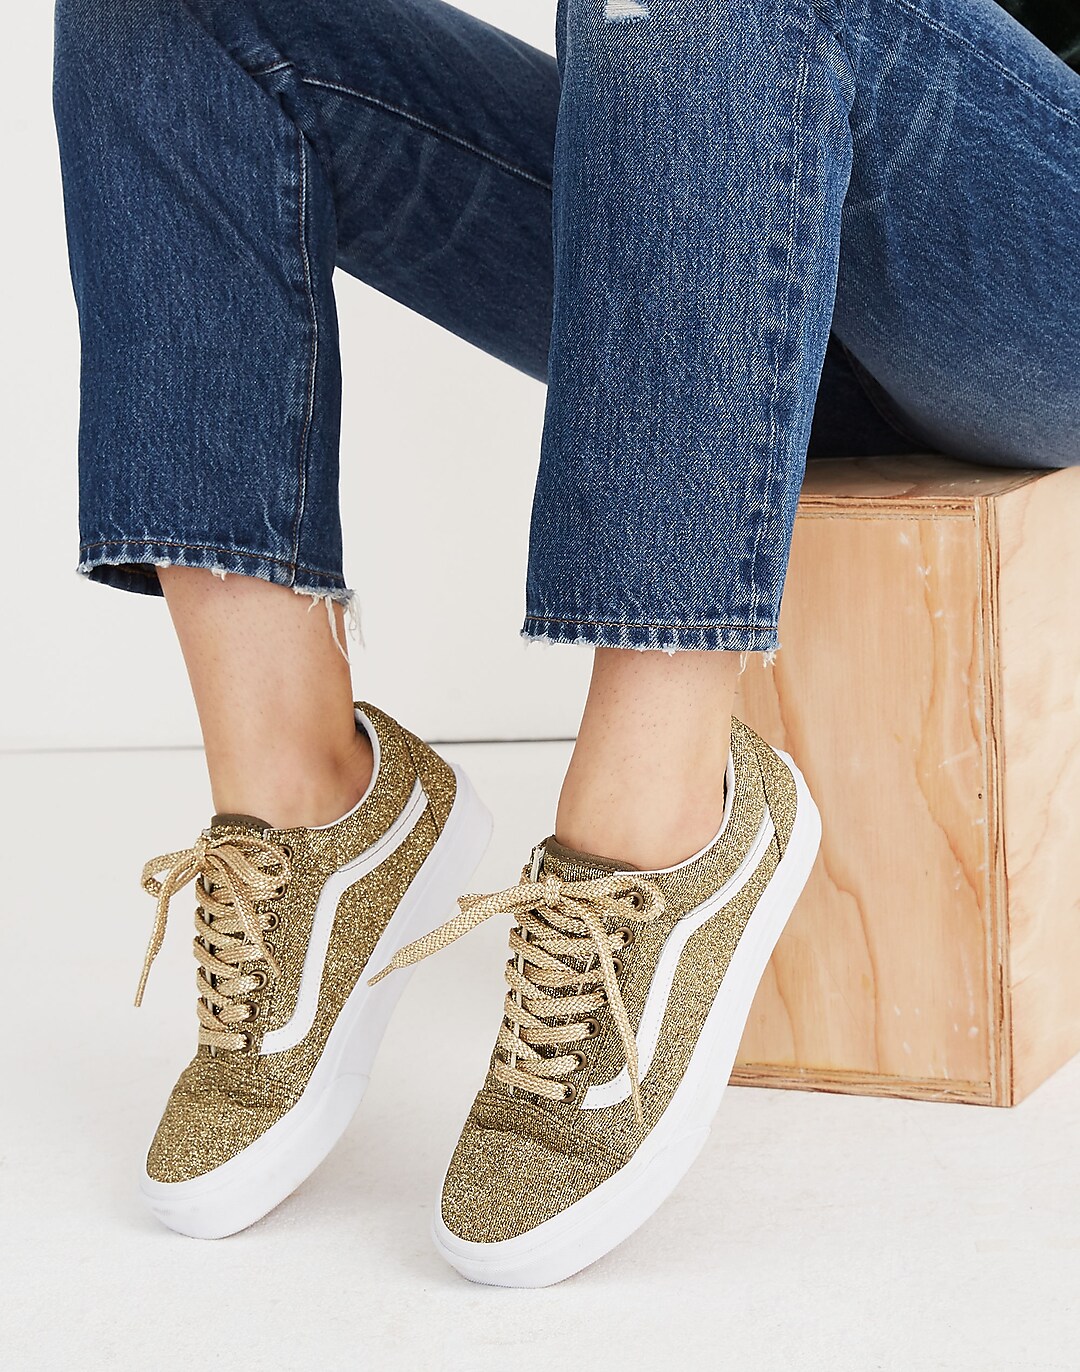 Vans® Unisex Old Skool Lace-Up Sneakers in Gold Glitter